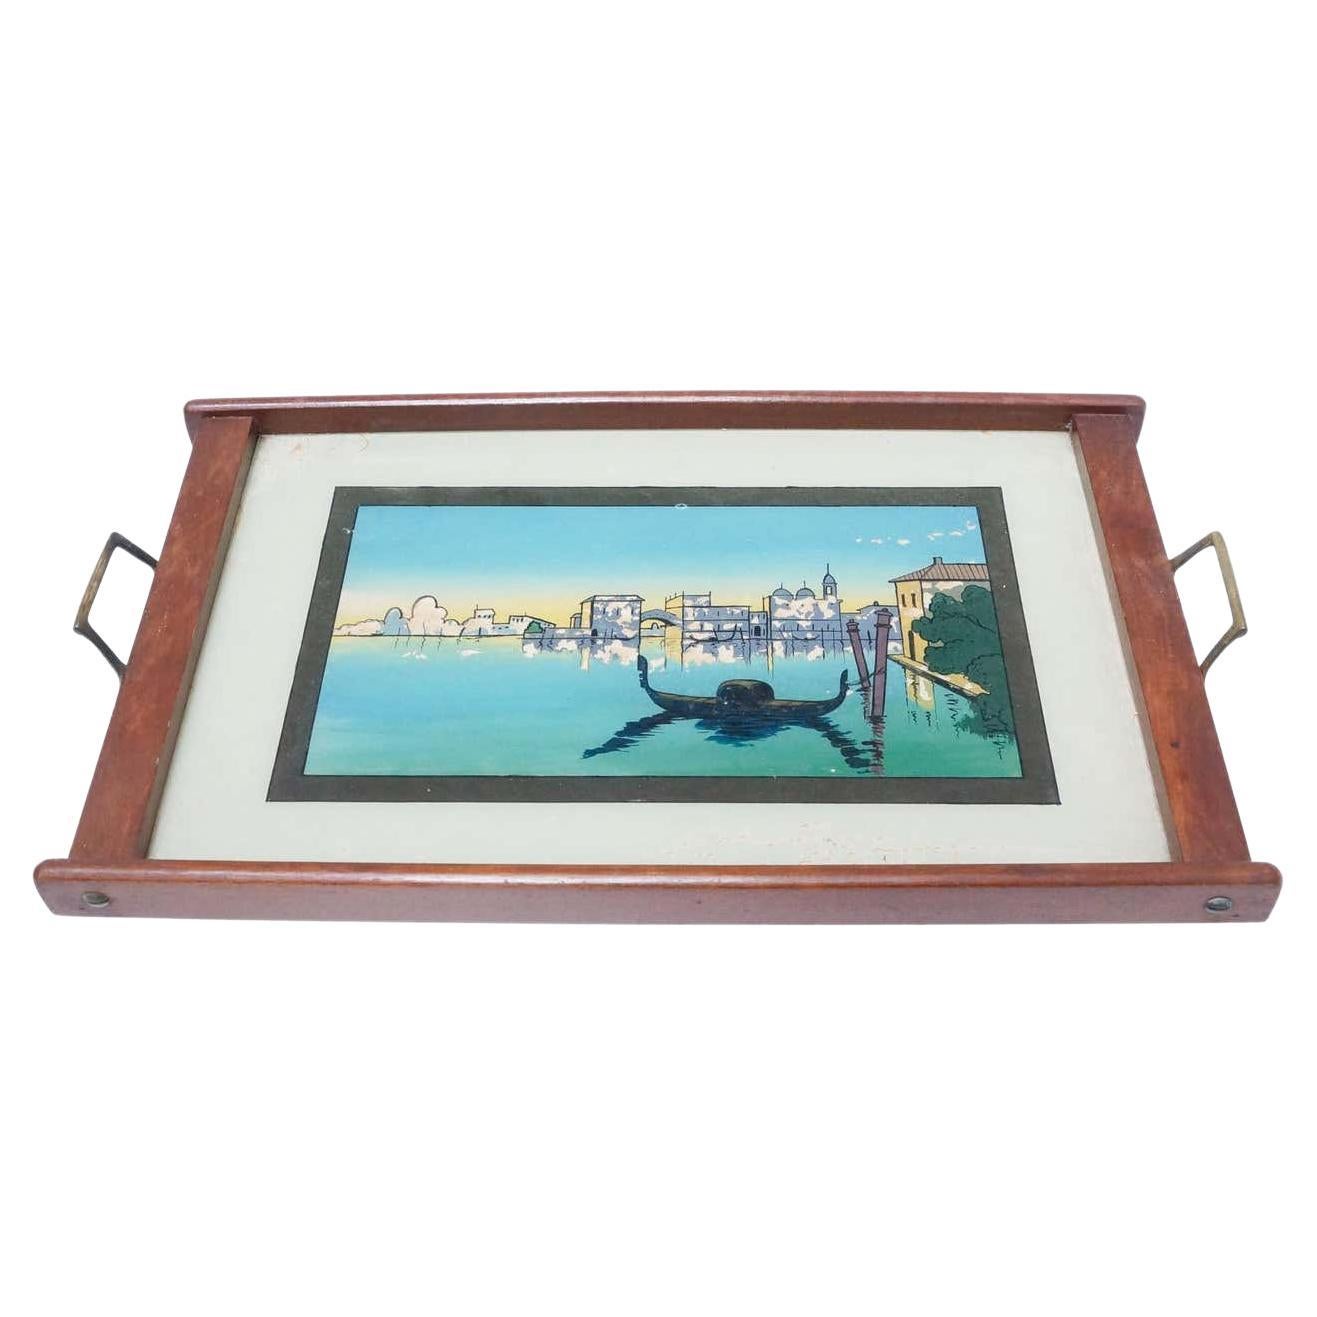 Antique Glass and Wood Tray with Venice Landscape, circa 1930 For Sale